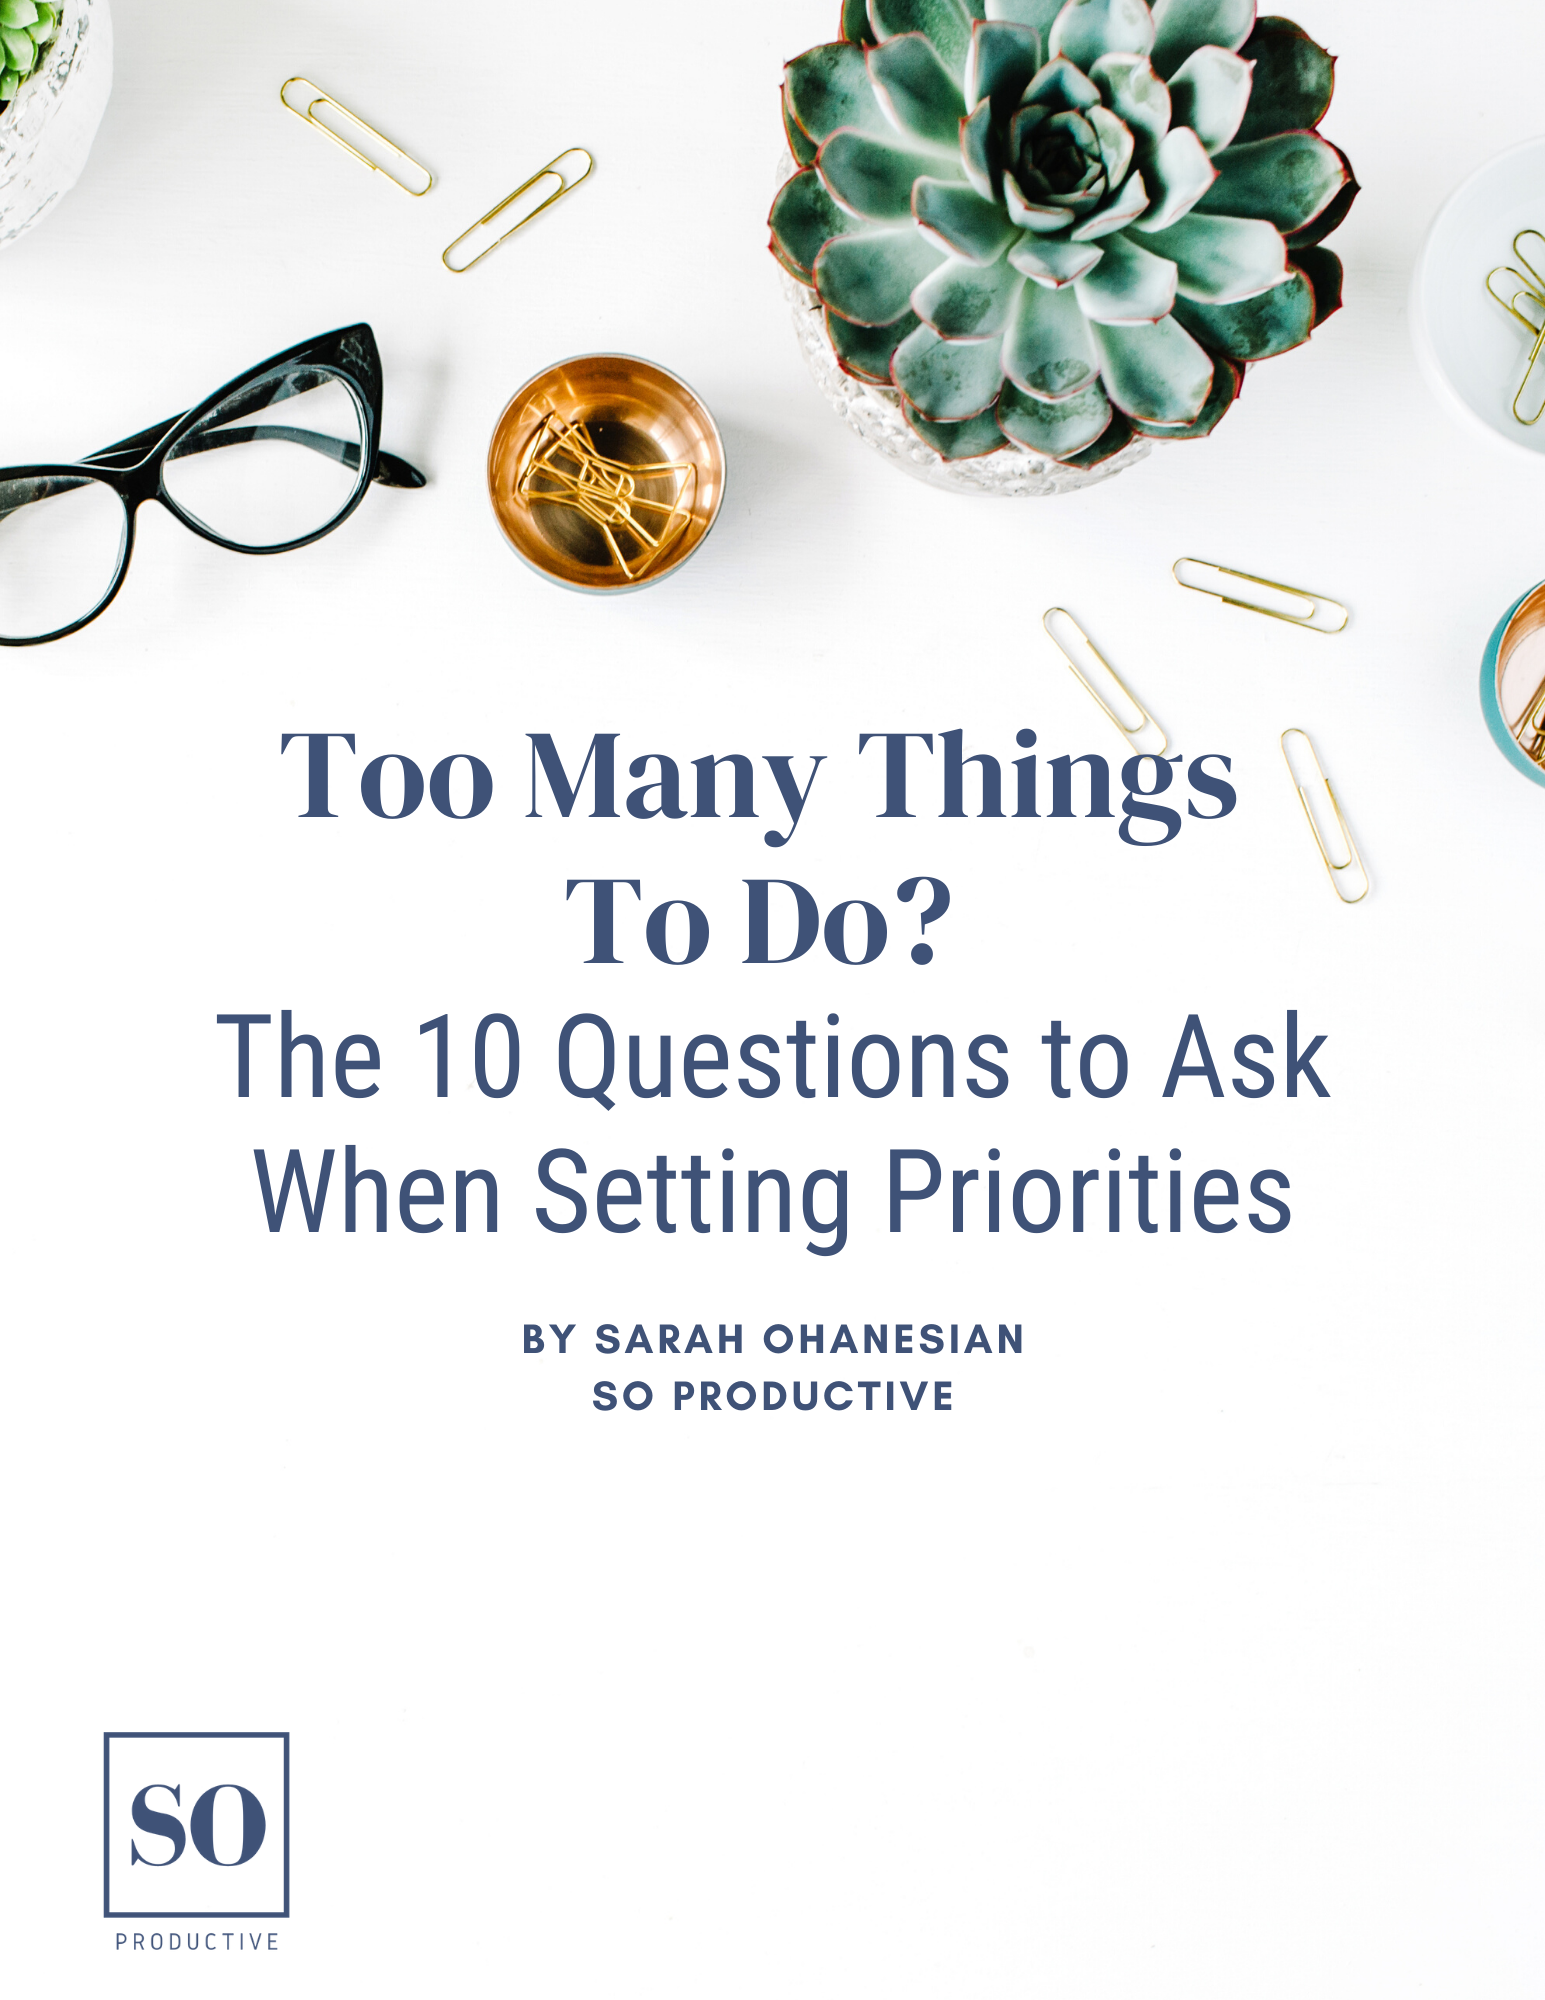 Questions to Ask When Setting Priorities by SO Productive